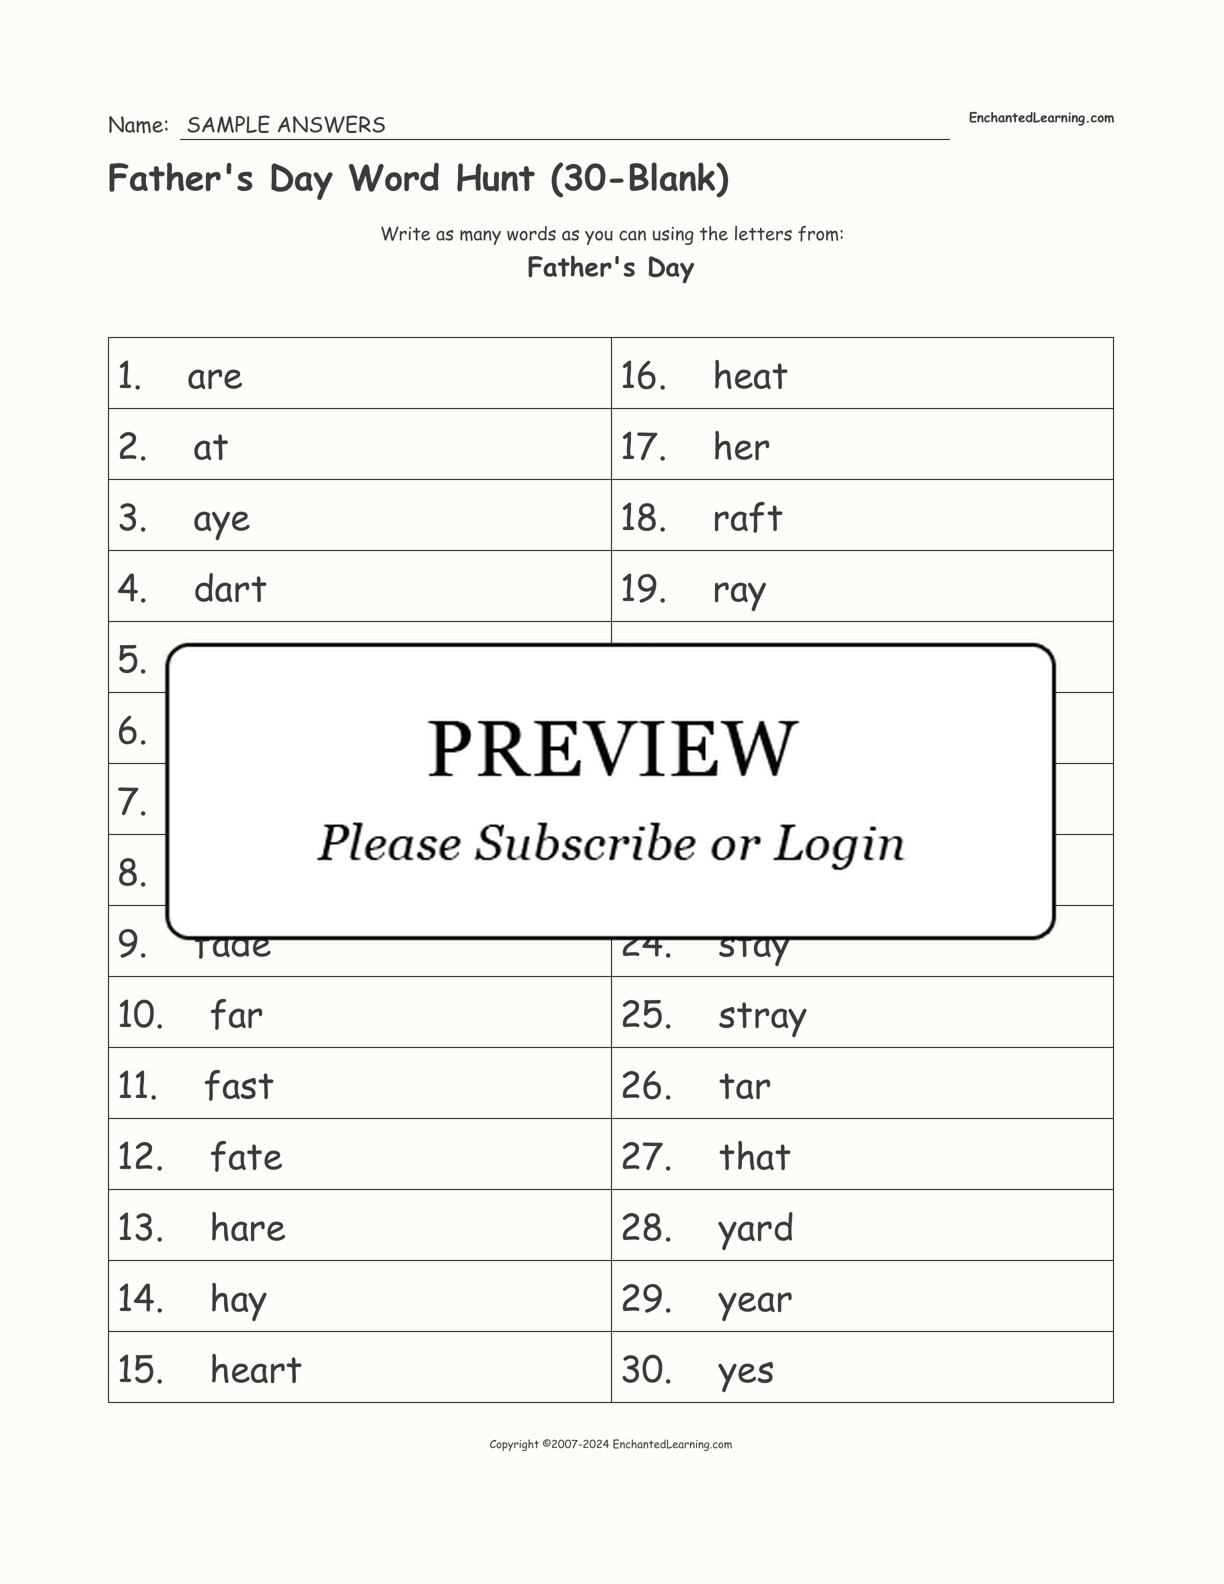 Father's Day Word Hunt (30-Blank) interactive worksheet page 2